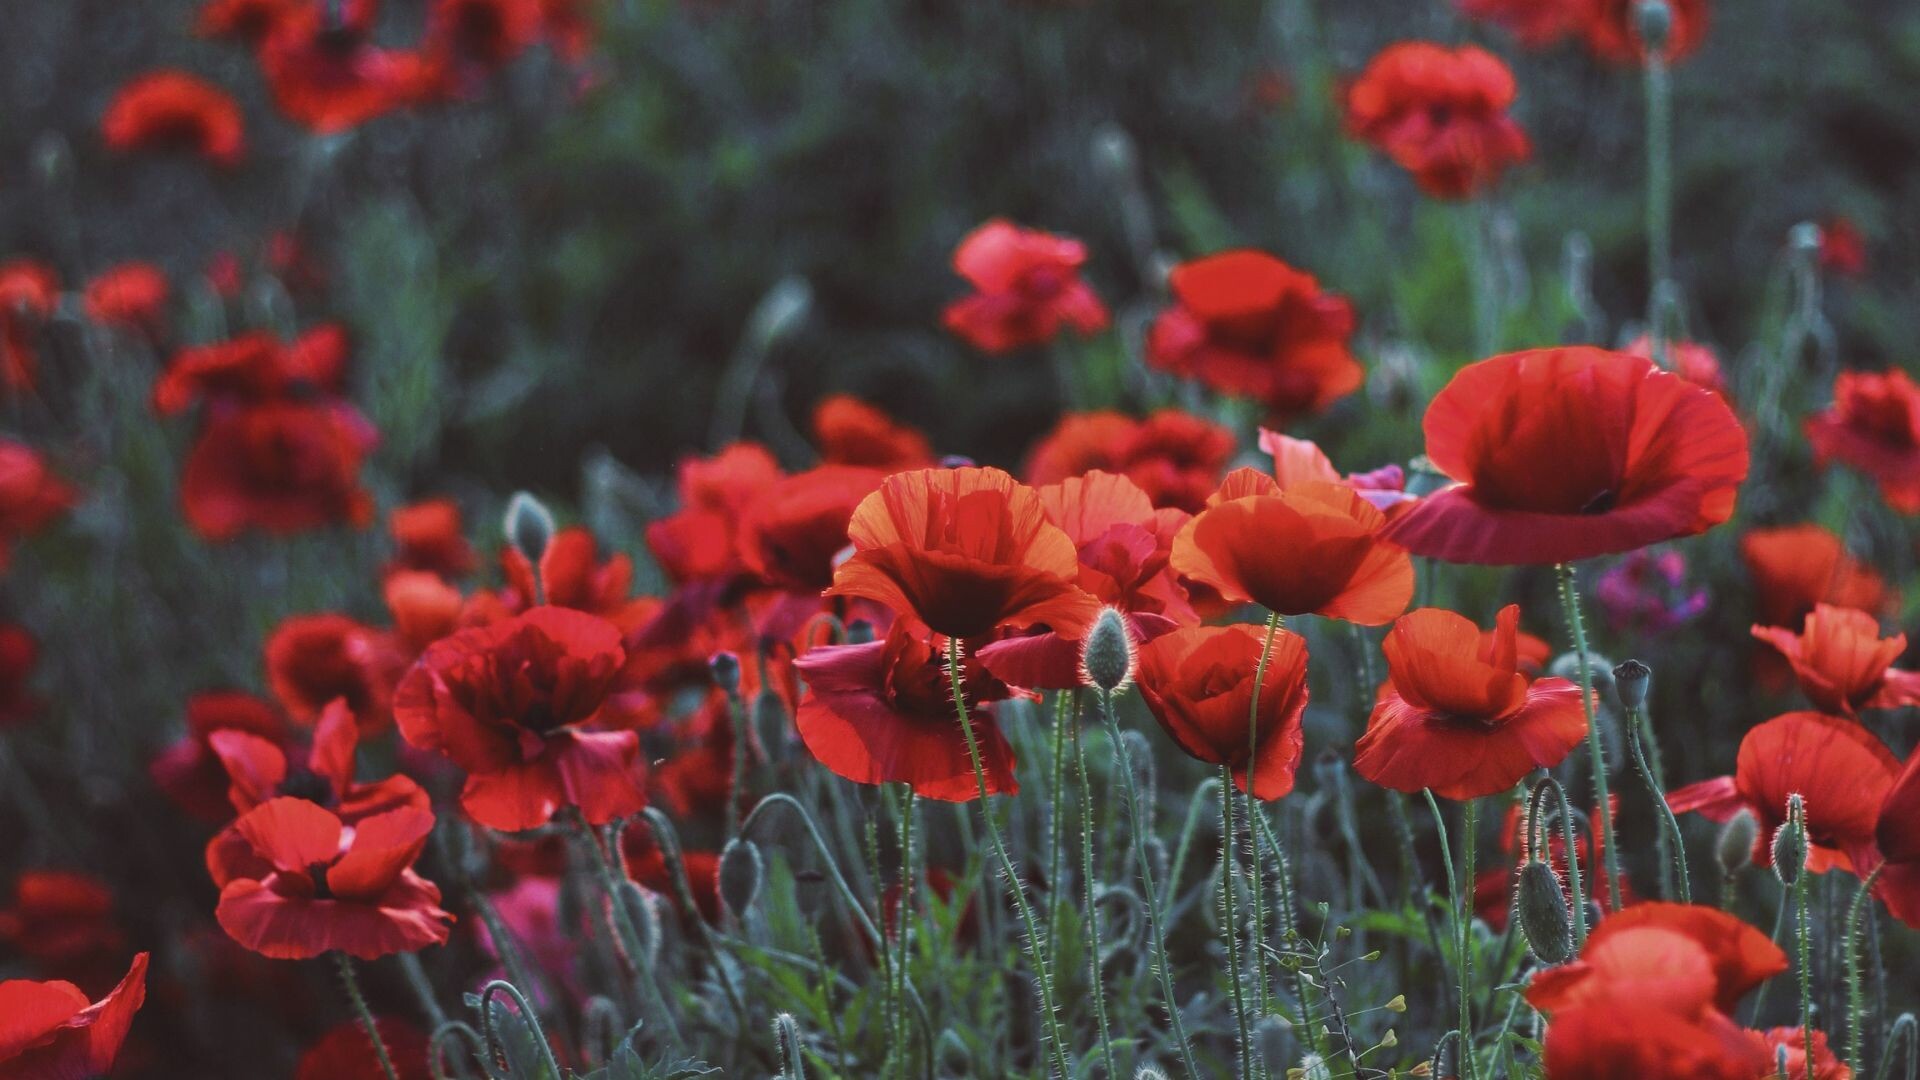 Poppy Flower: Poppies can be found across the country in the summer months, although modern agriculture has decreased its range. 1920x1080 Full HD Background.